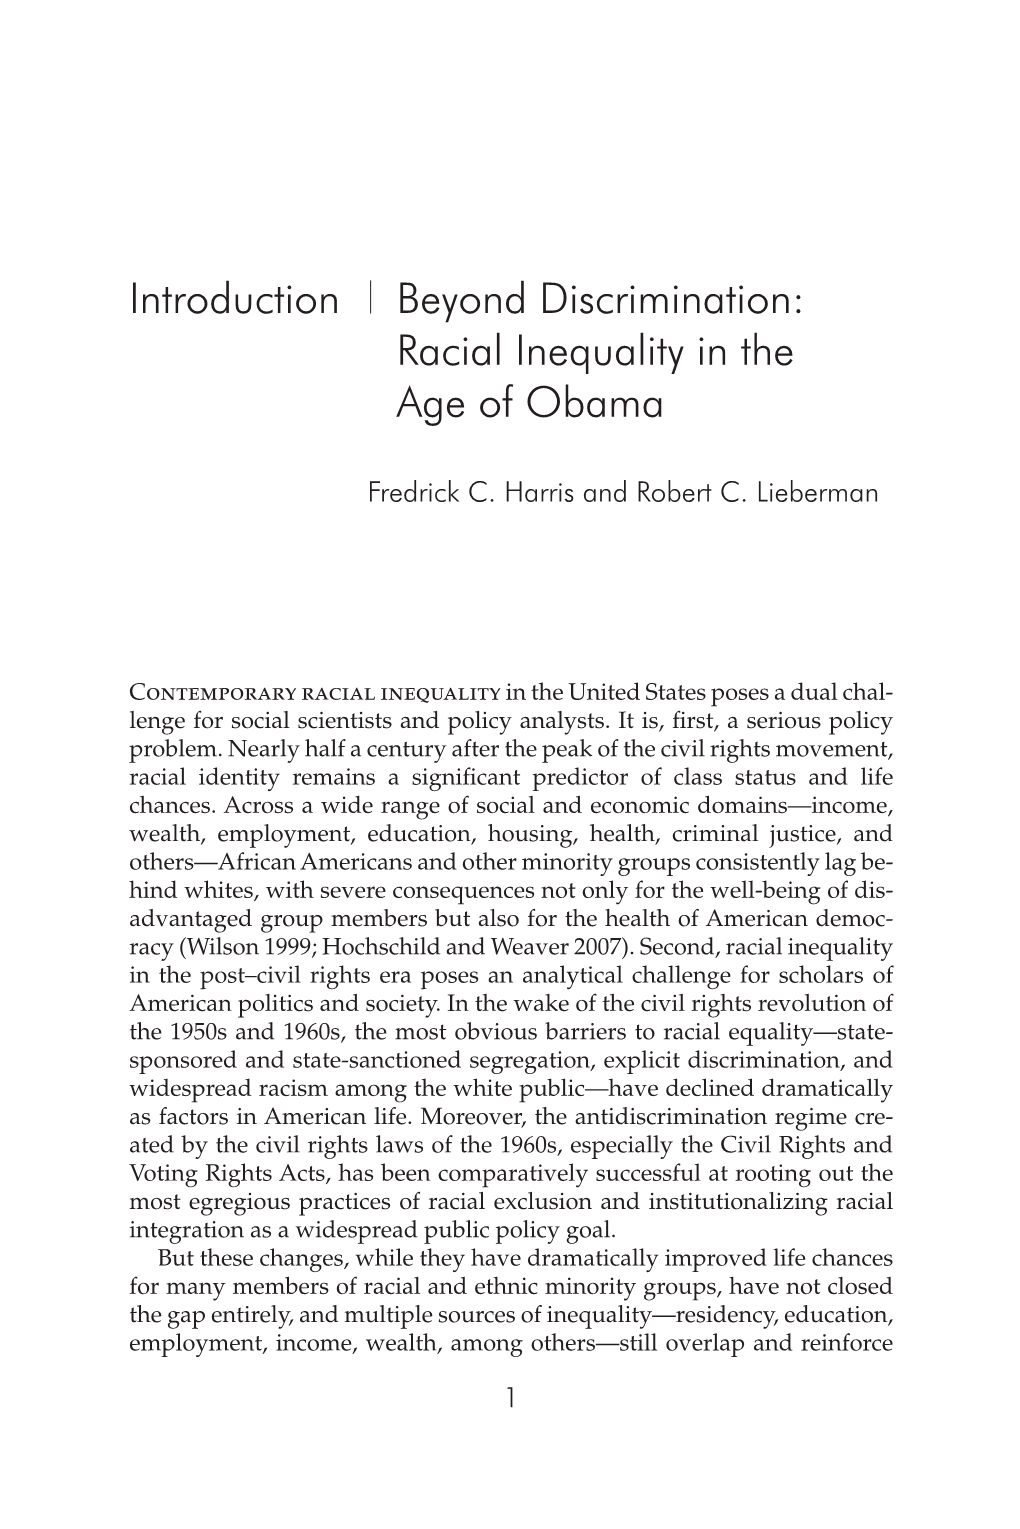 Introduction Beyond Discrimination: Racial Inequality in the Age of Obama